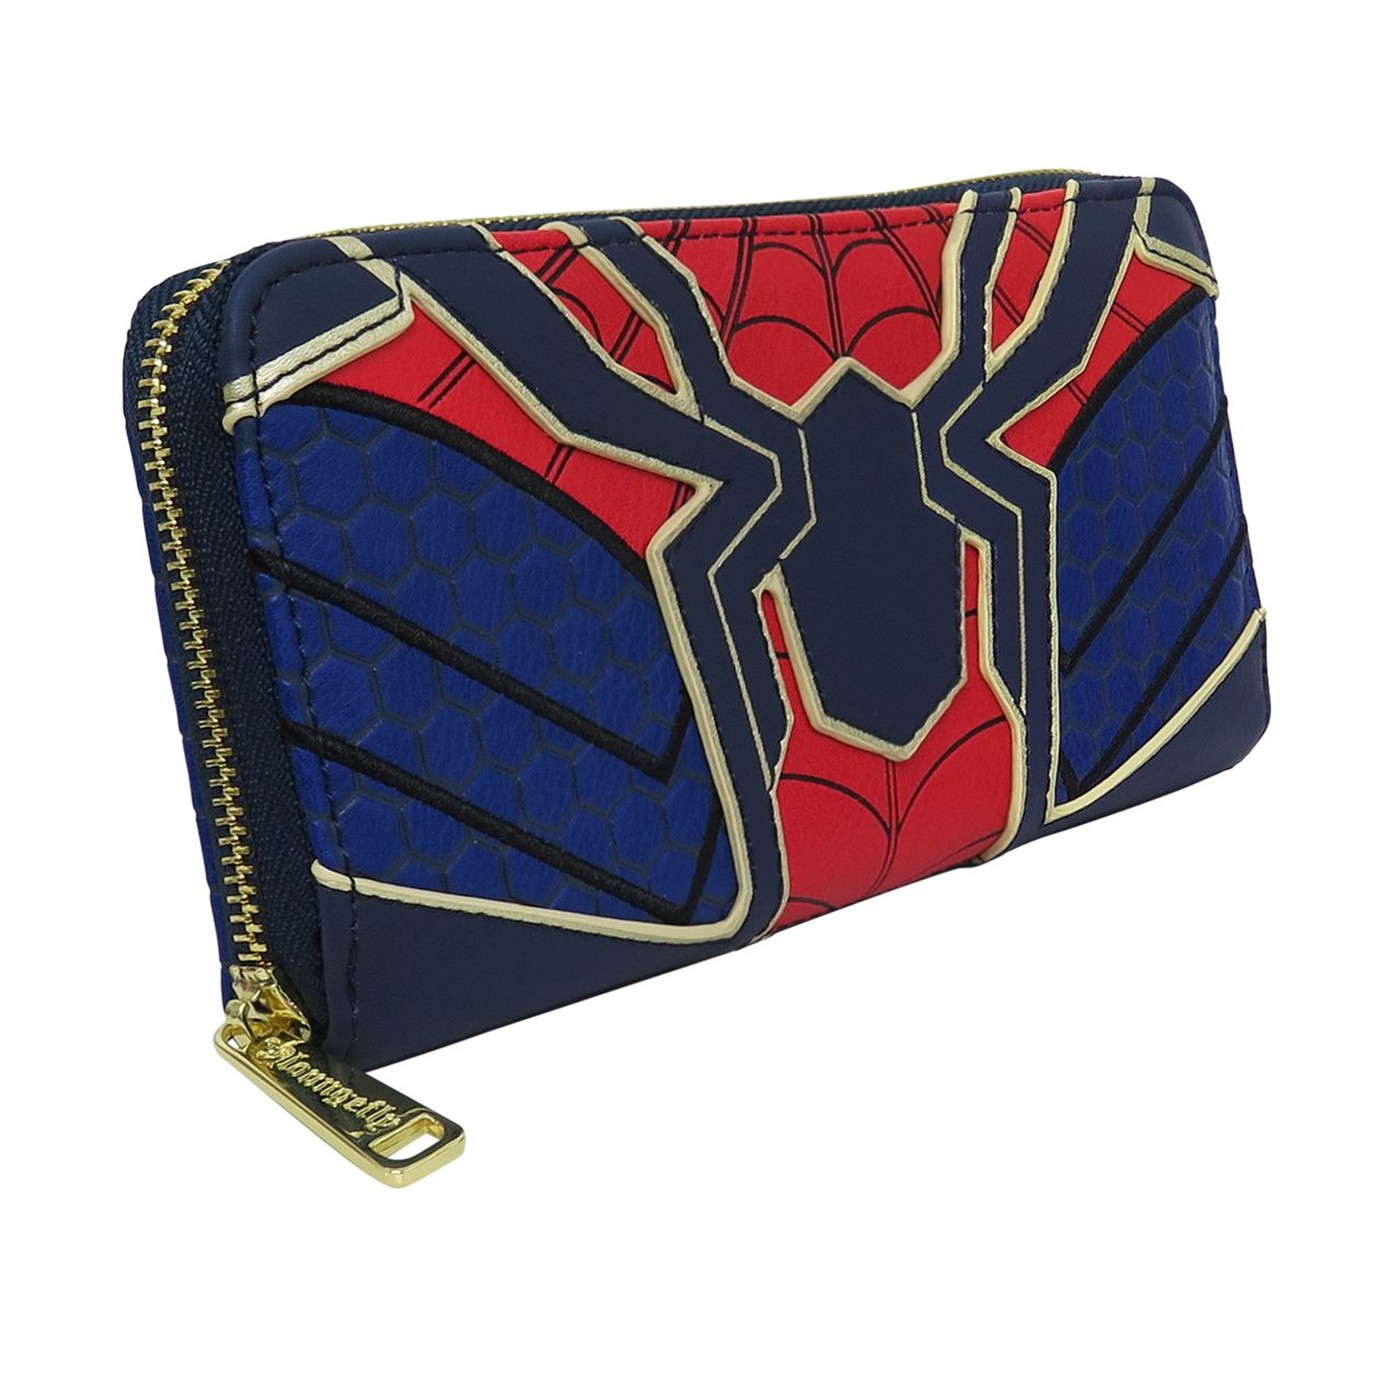 Avengers Infinity War Loungefly Iron Spider Wallet